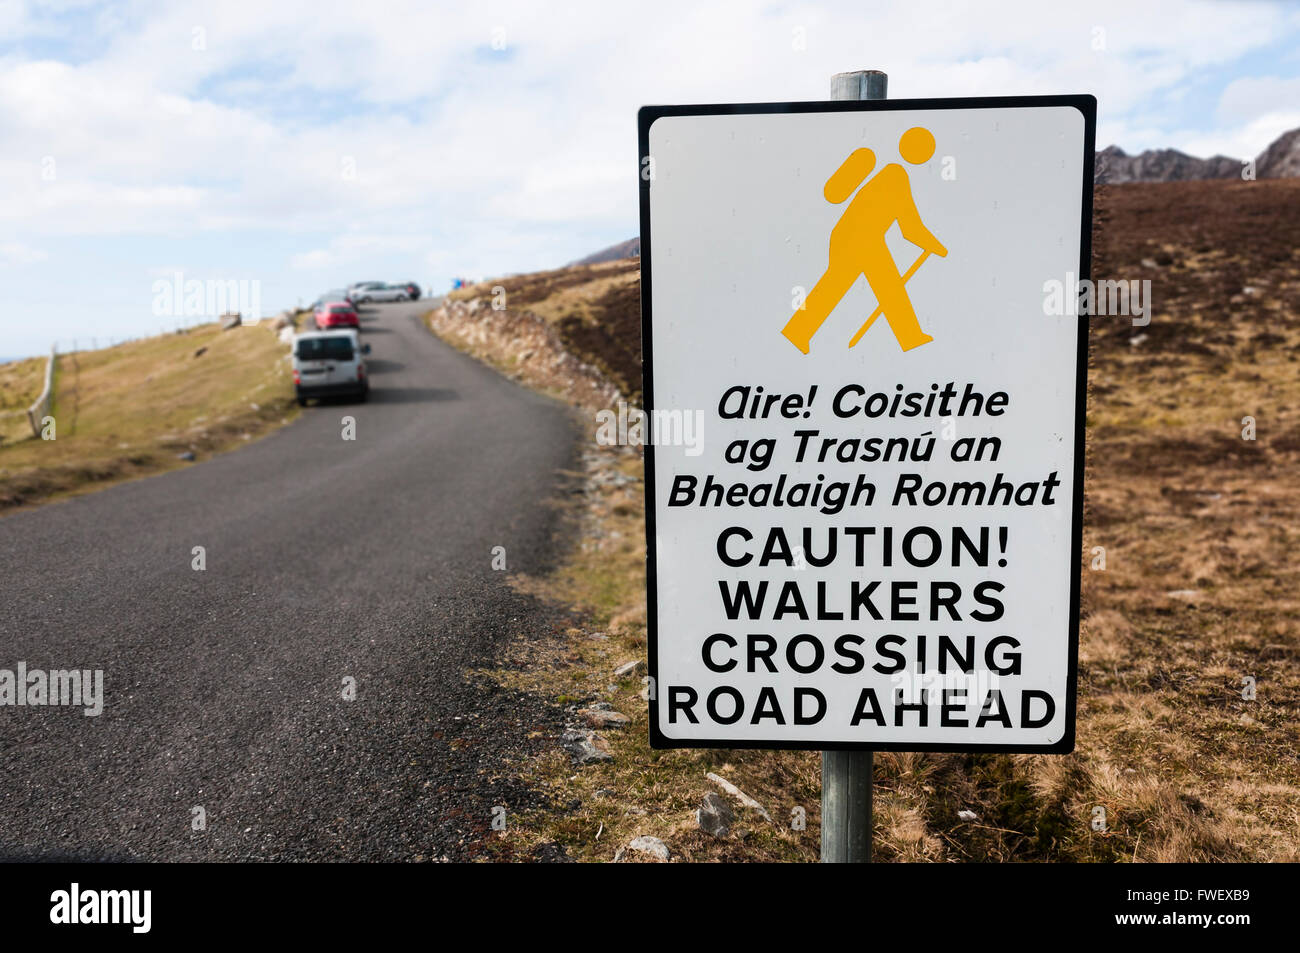 Sign in Irish and English, warning drivers that walkers are crossing the road ahead. Stock Photo